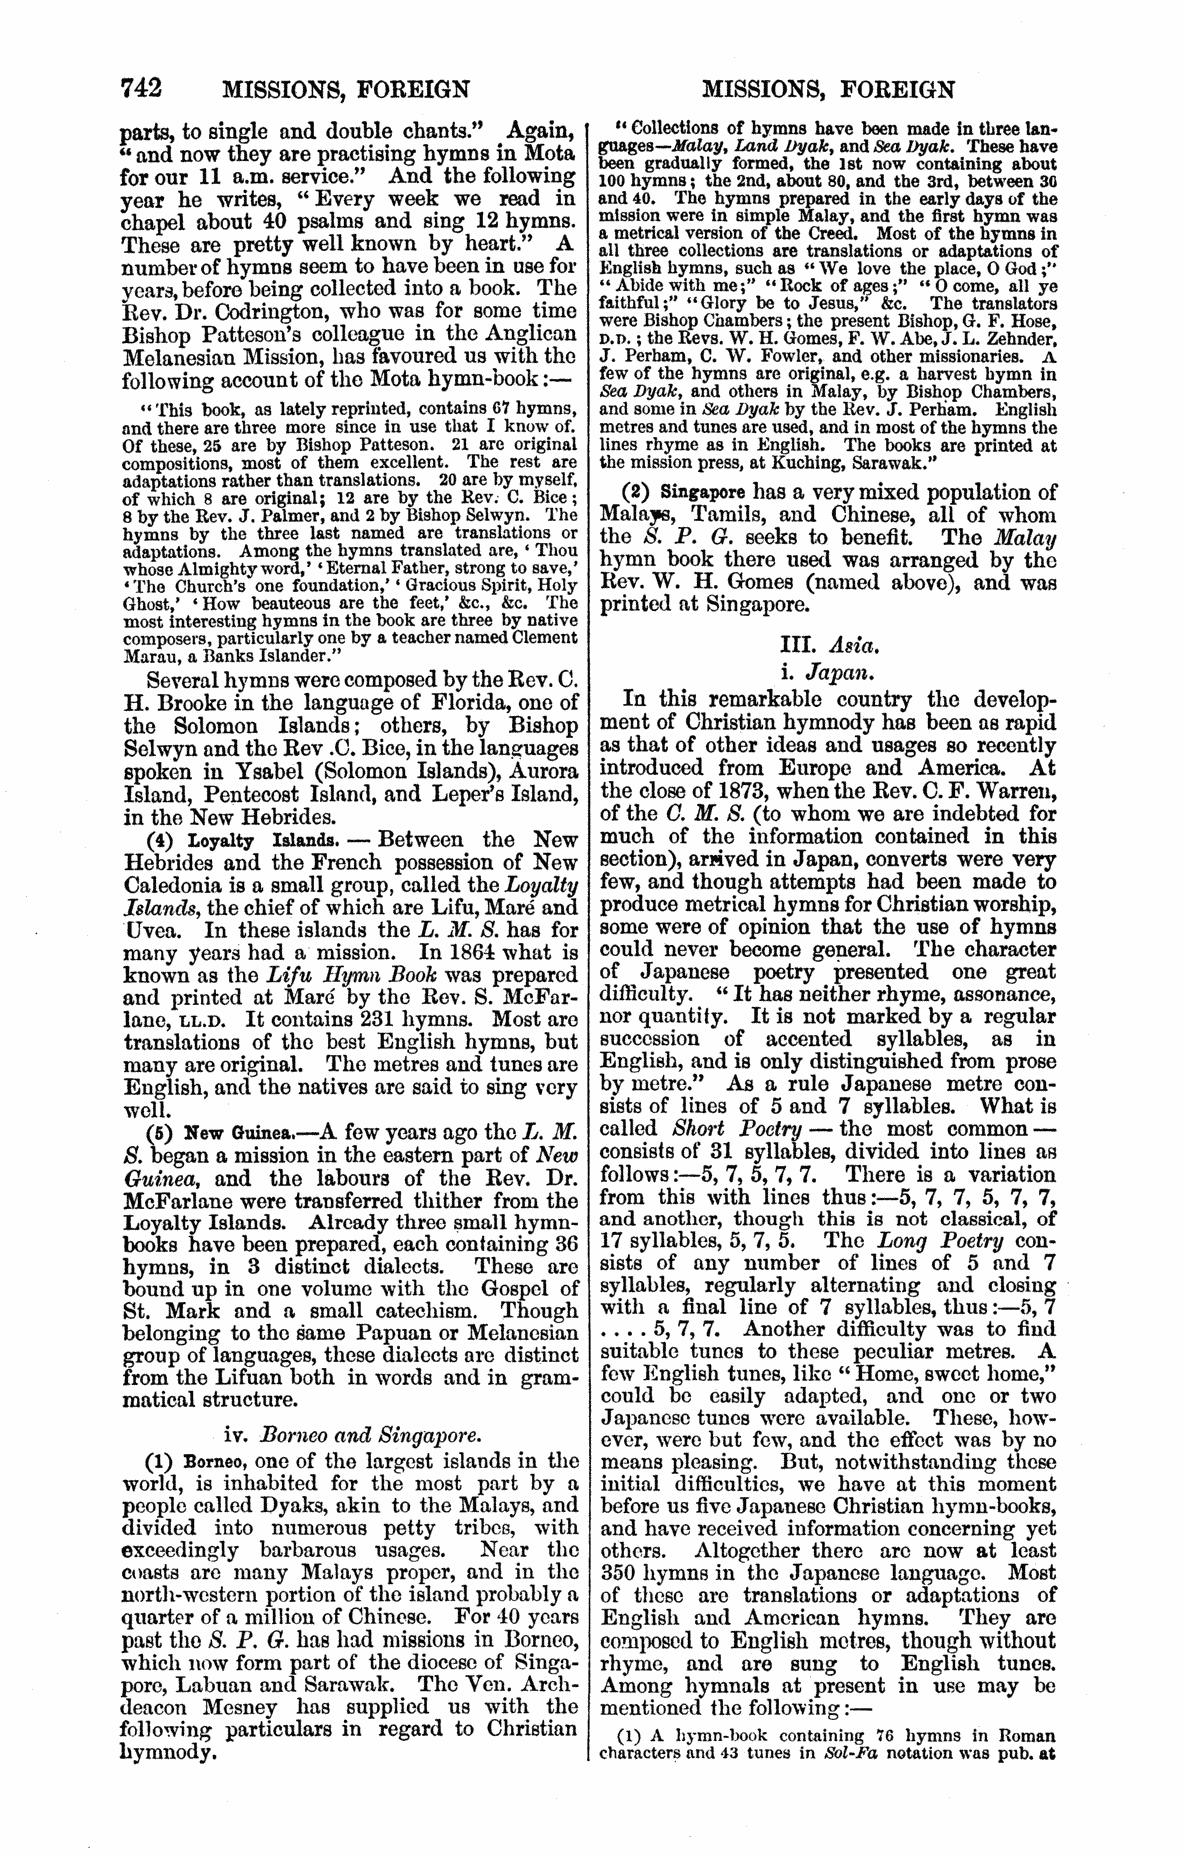 Image of page 742